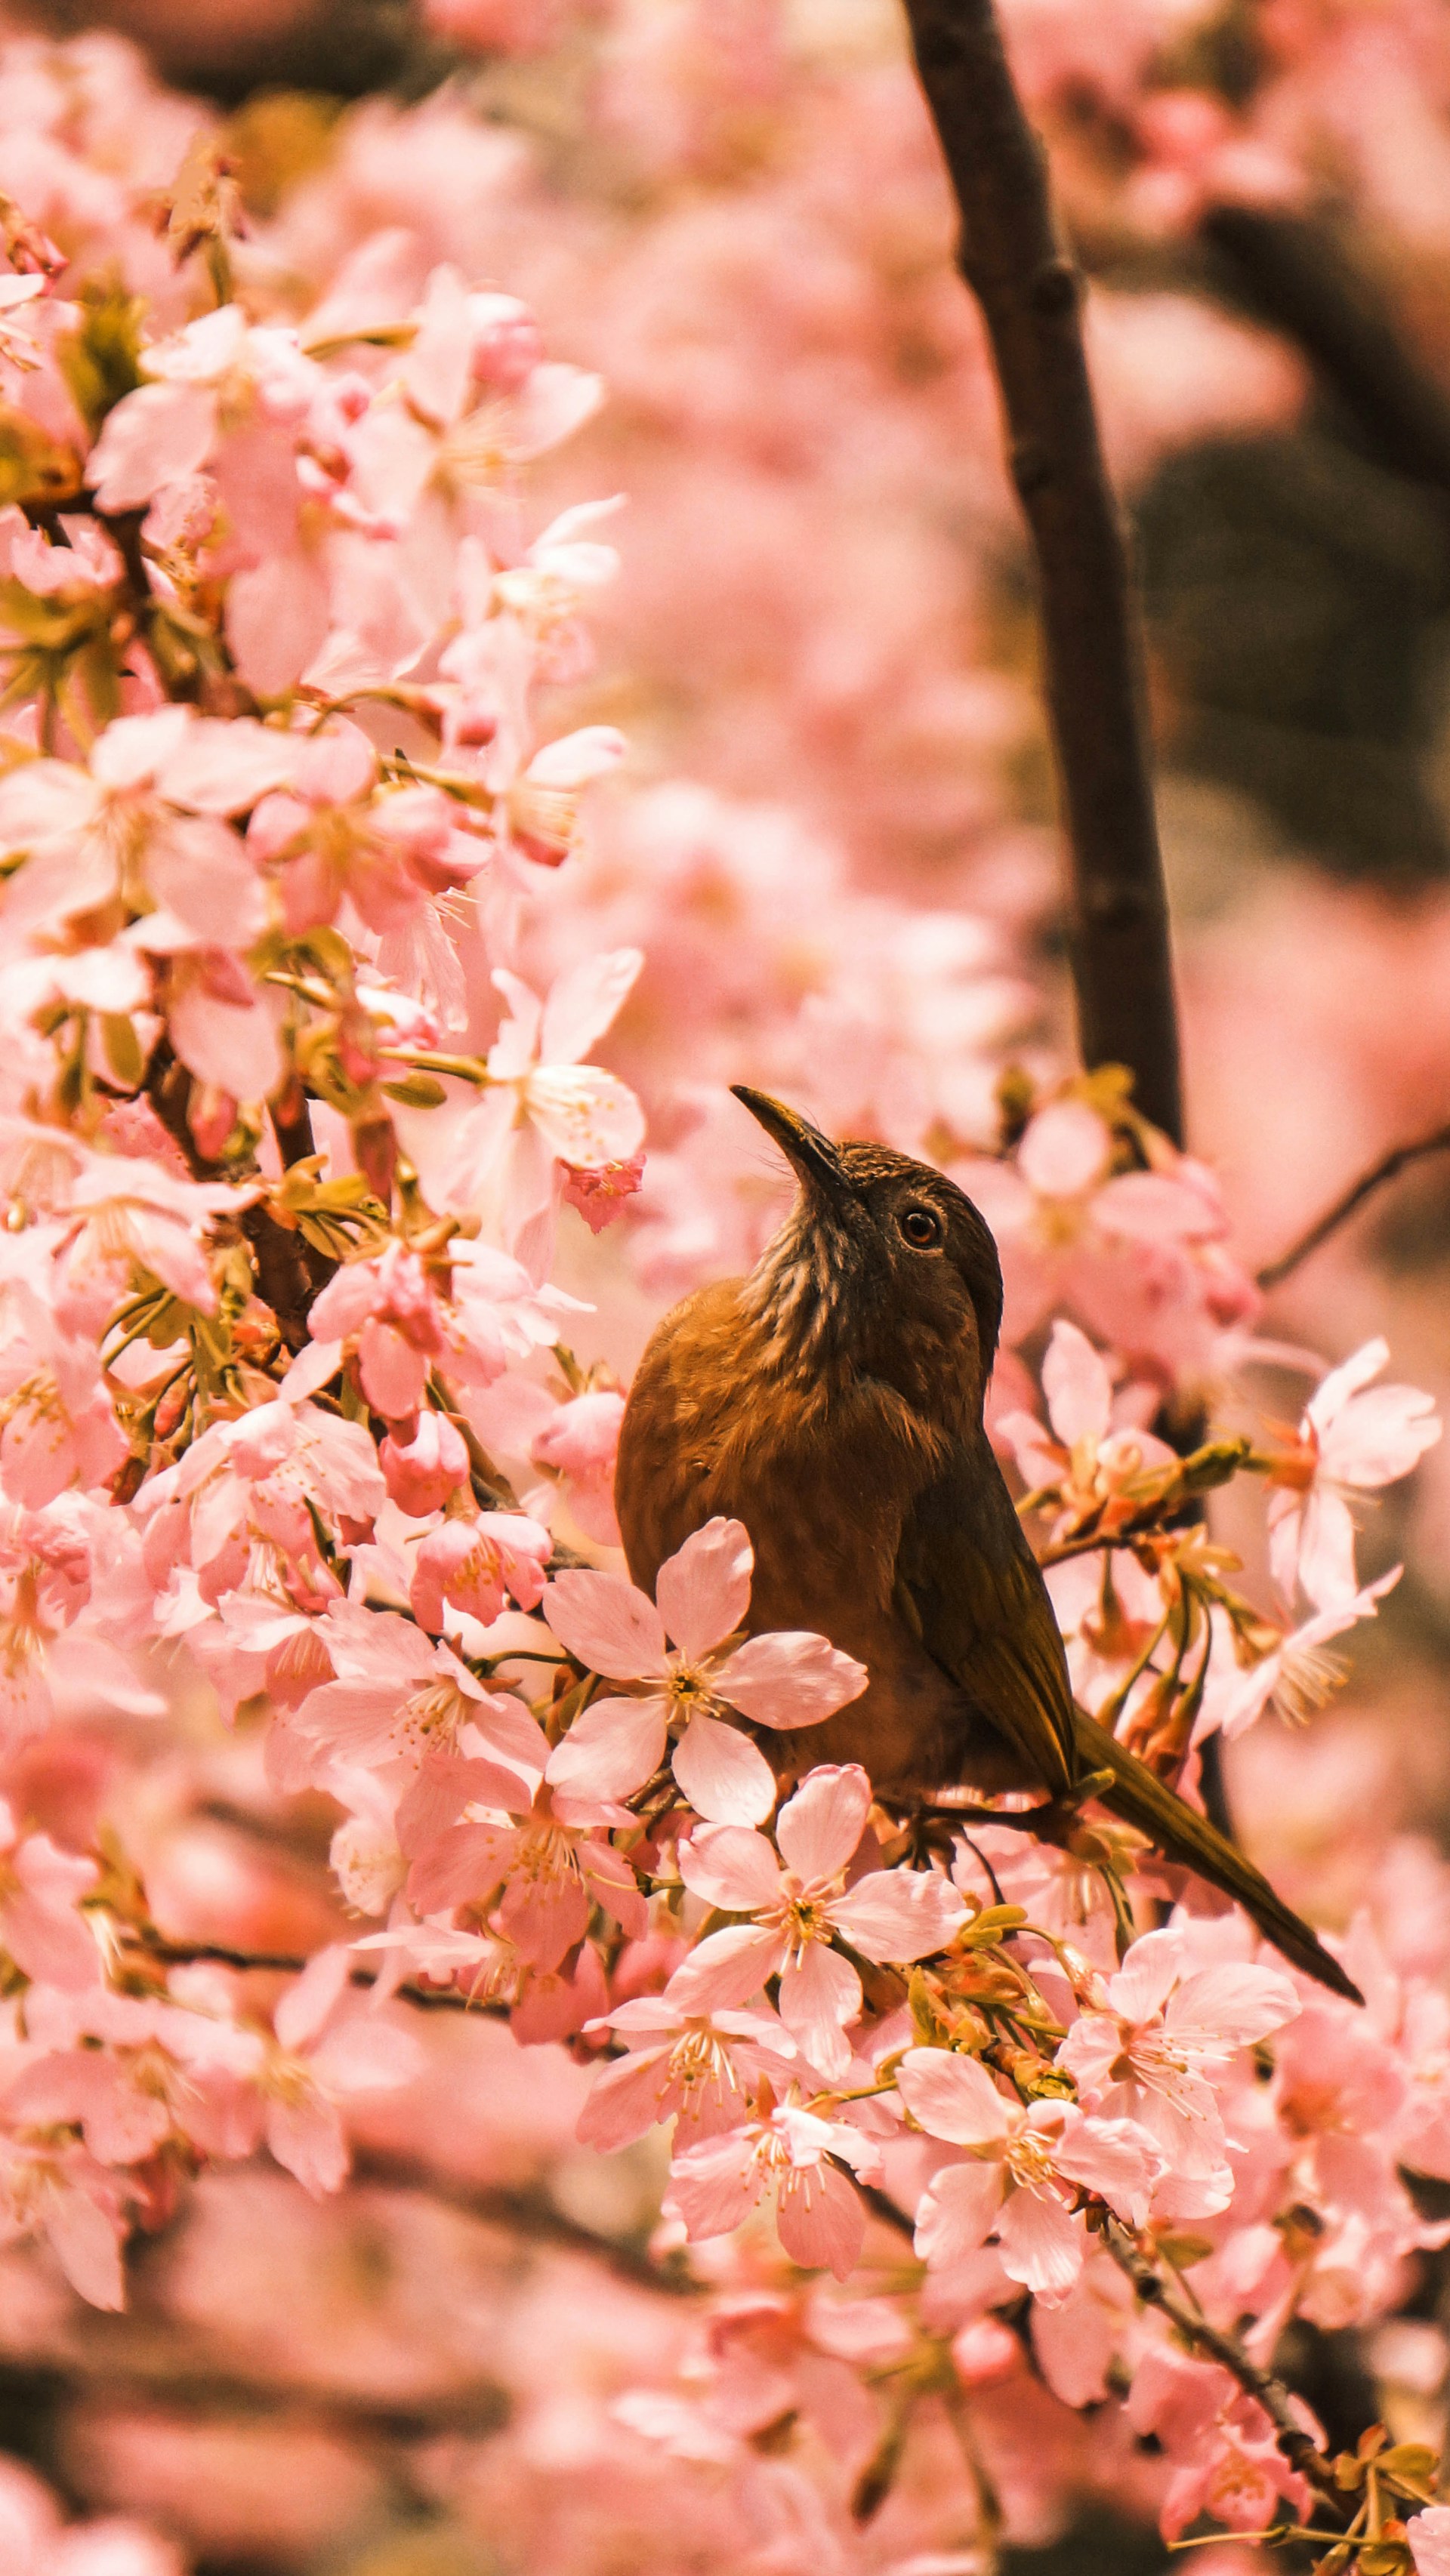 Wallpapers of Birds and Flowers 1920x3412